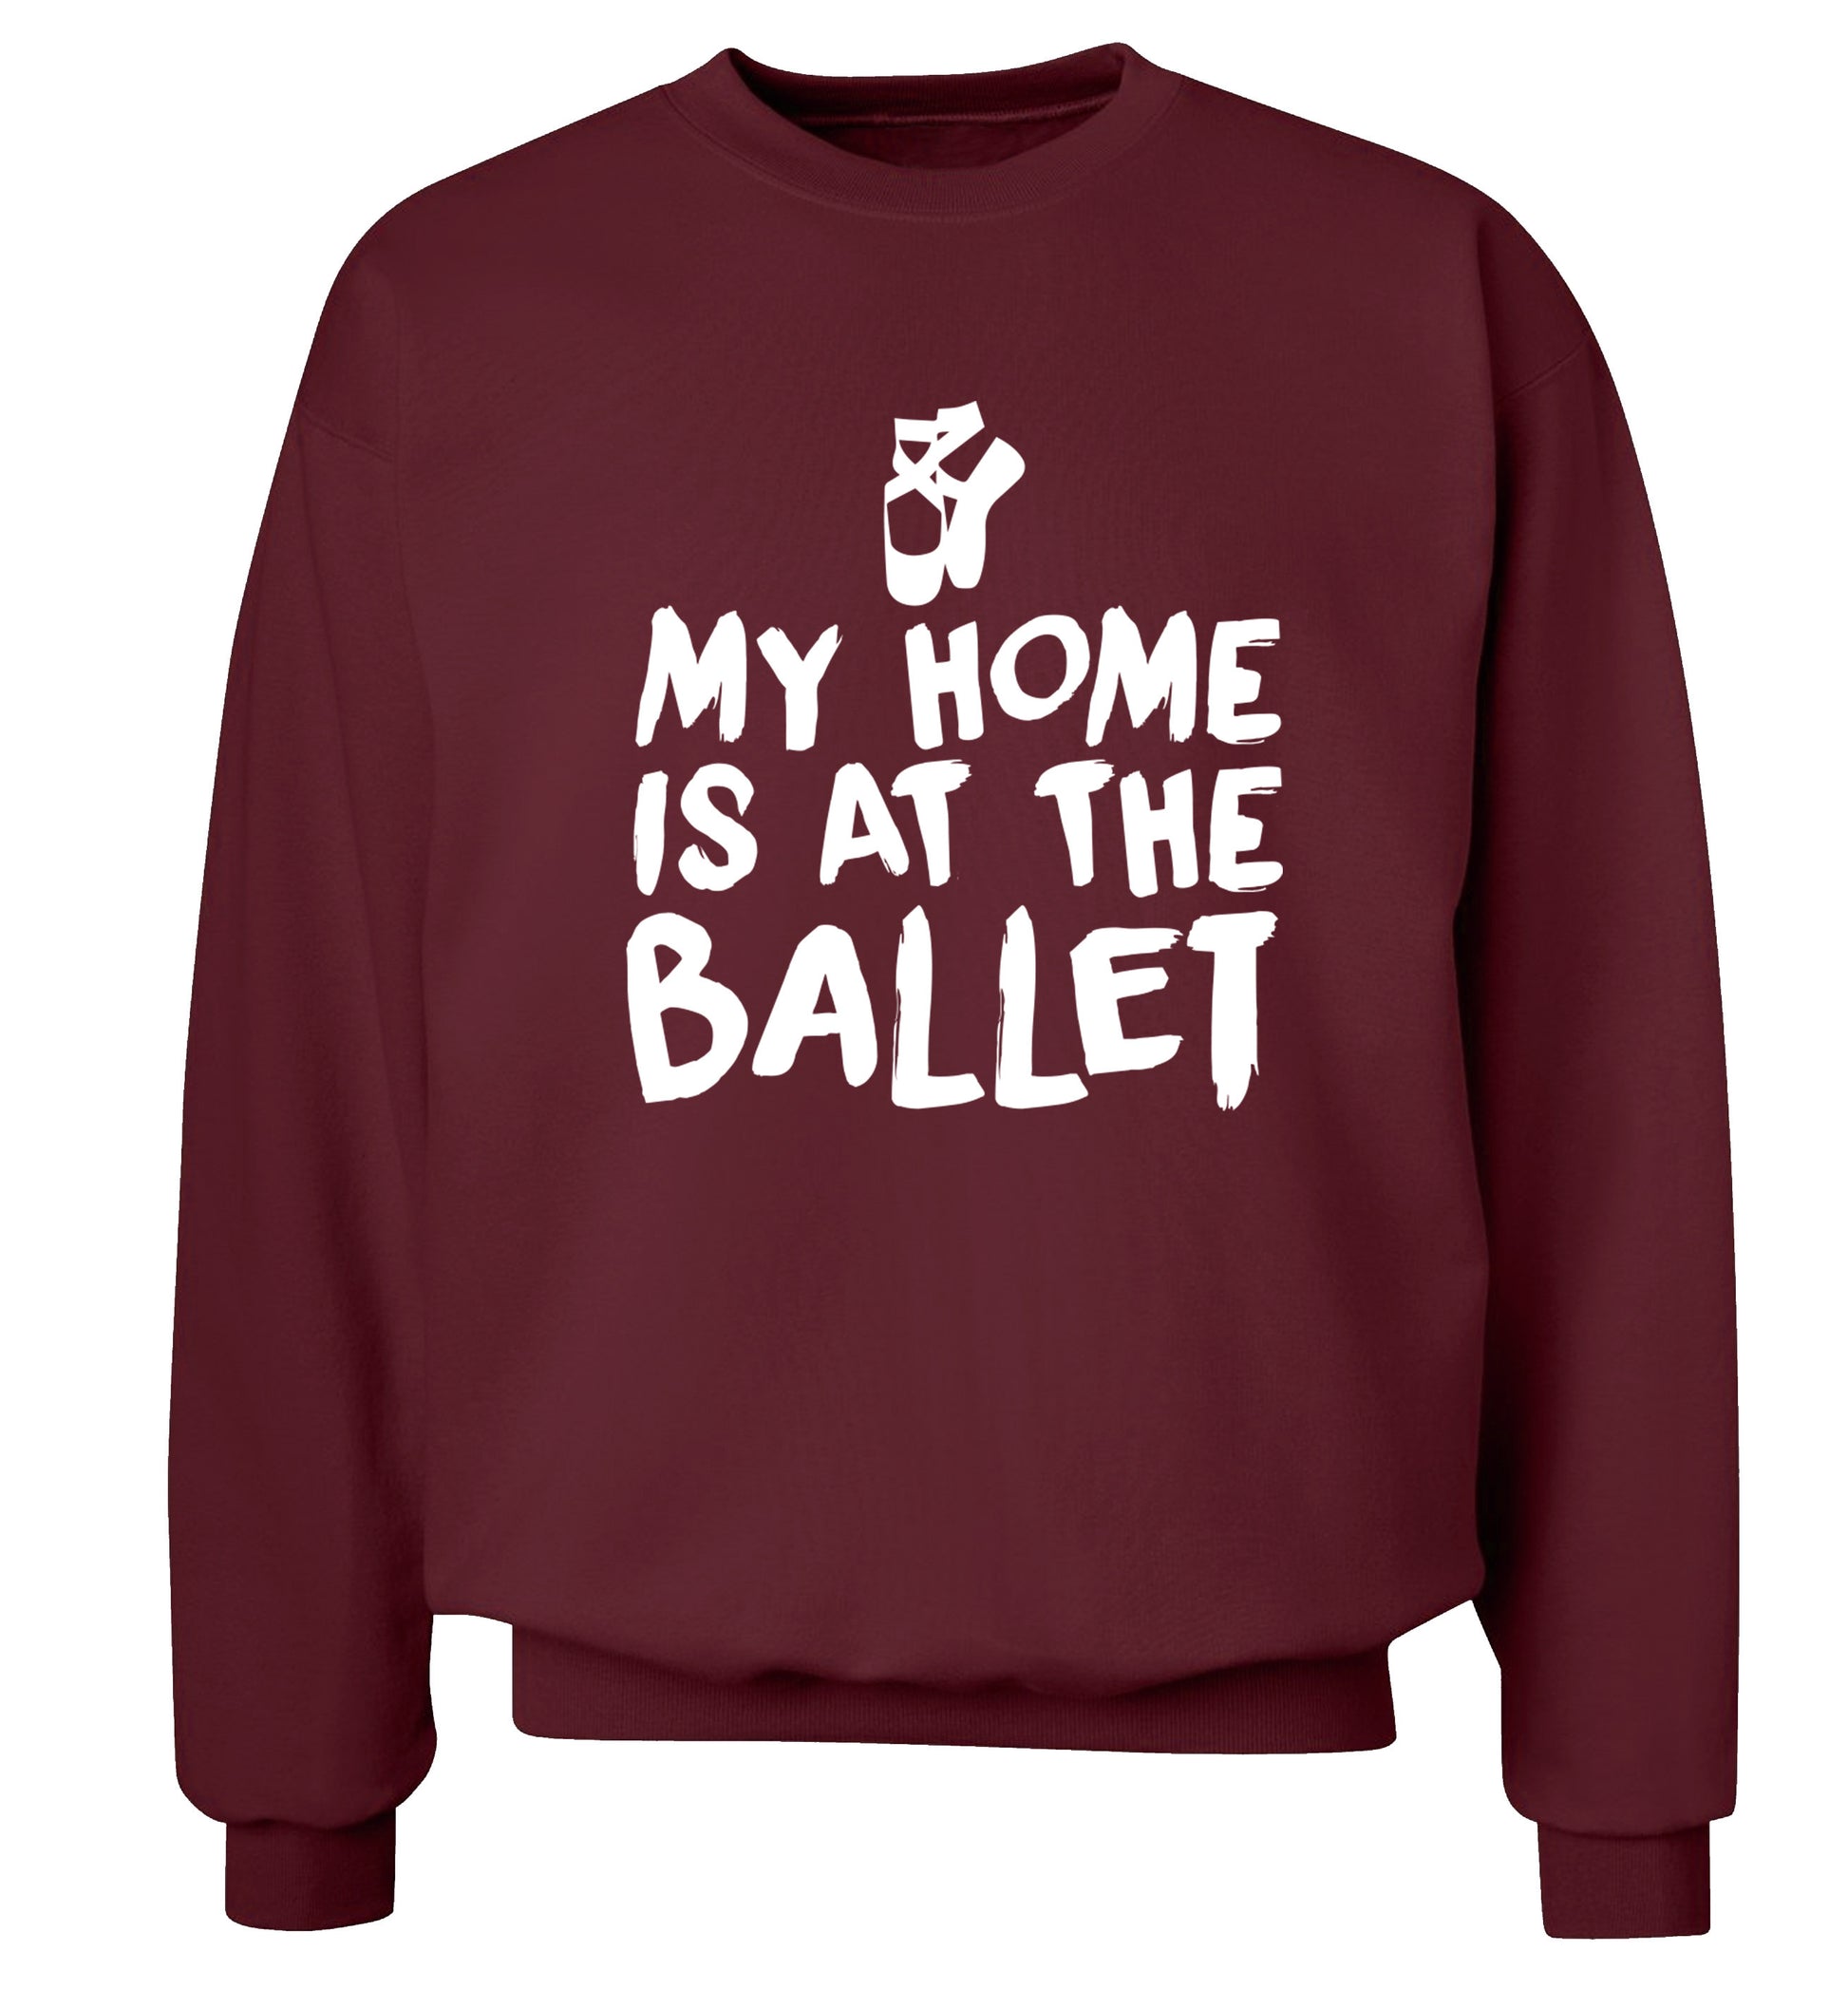 My home is at the dance studio Adult's unisex maroon Sweater 2XL